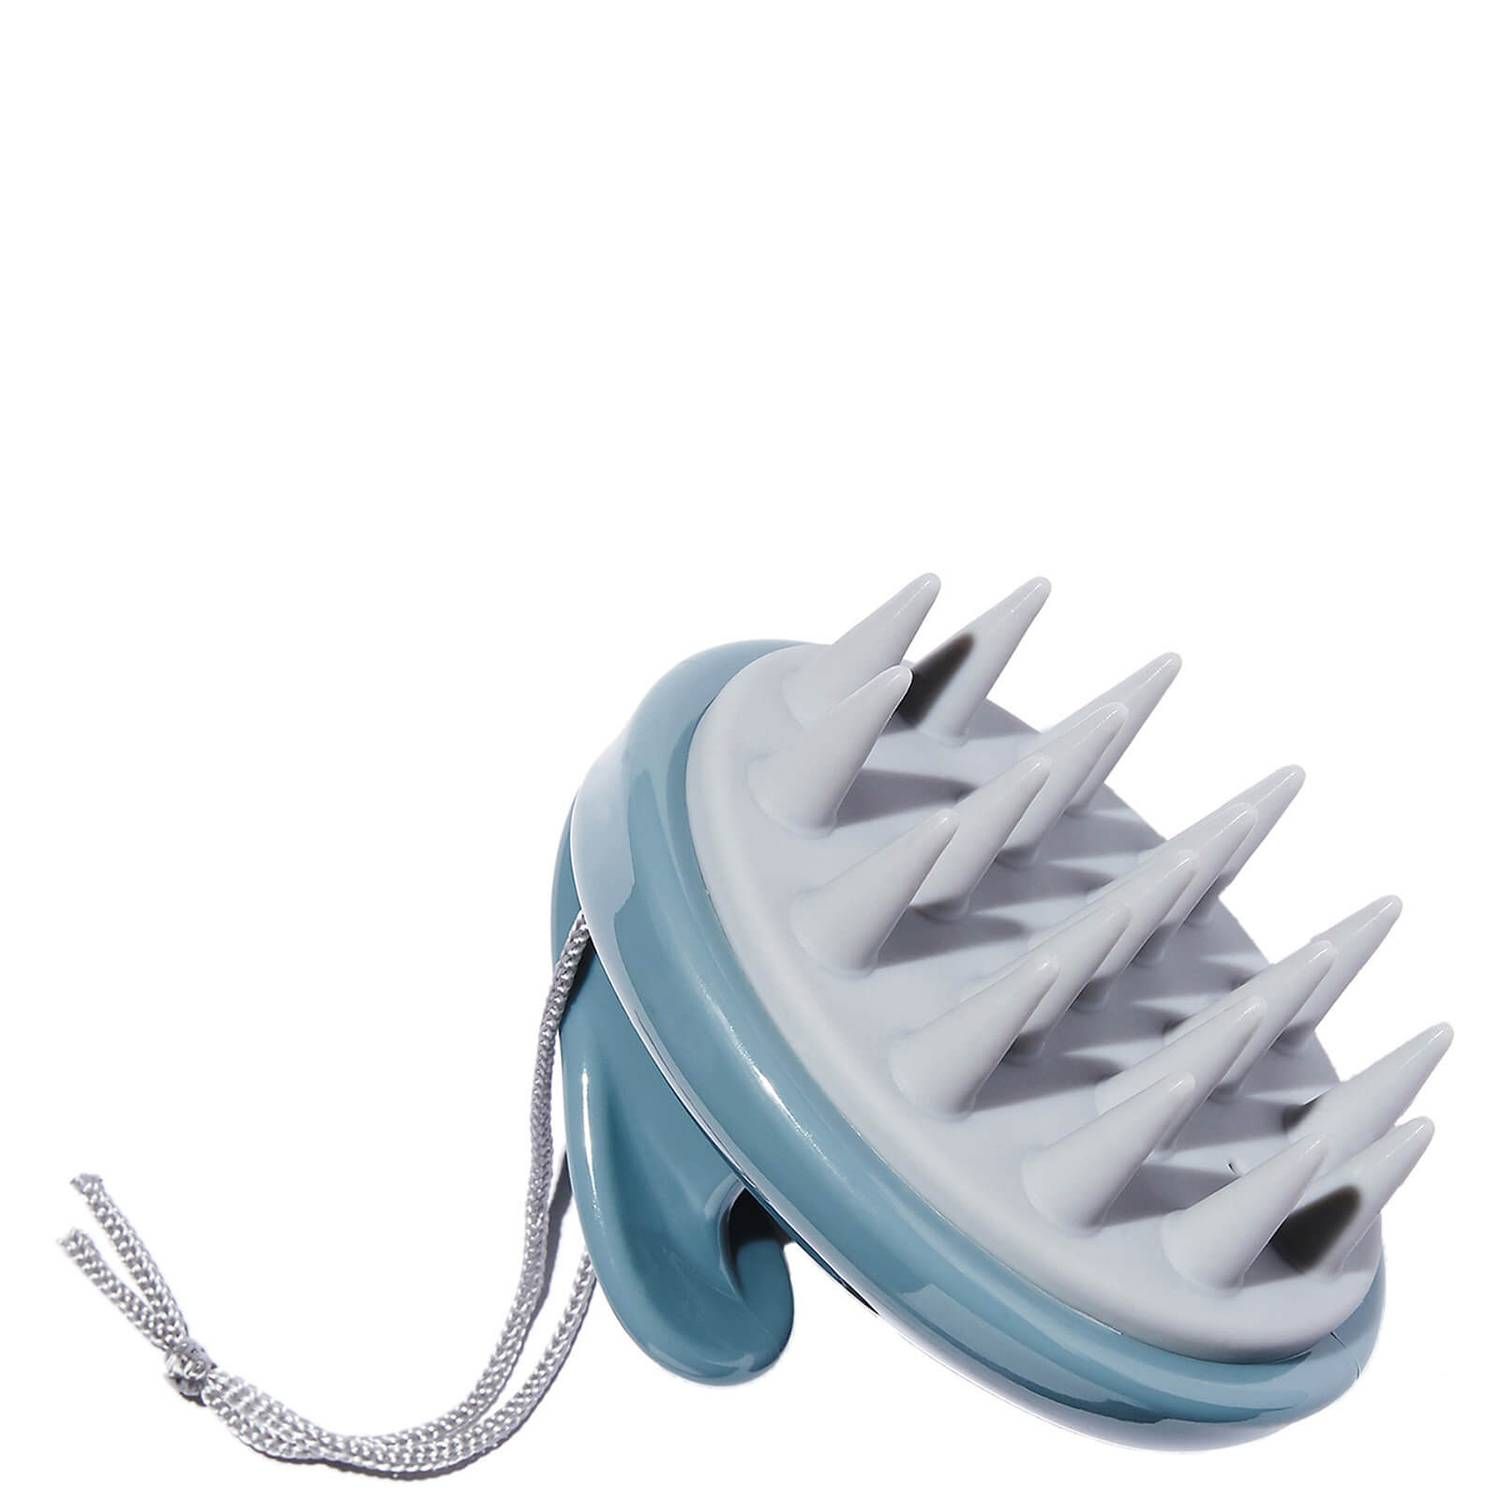 Scalp Revival Stimulating Therapy Massager 